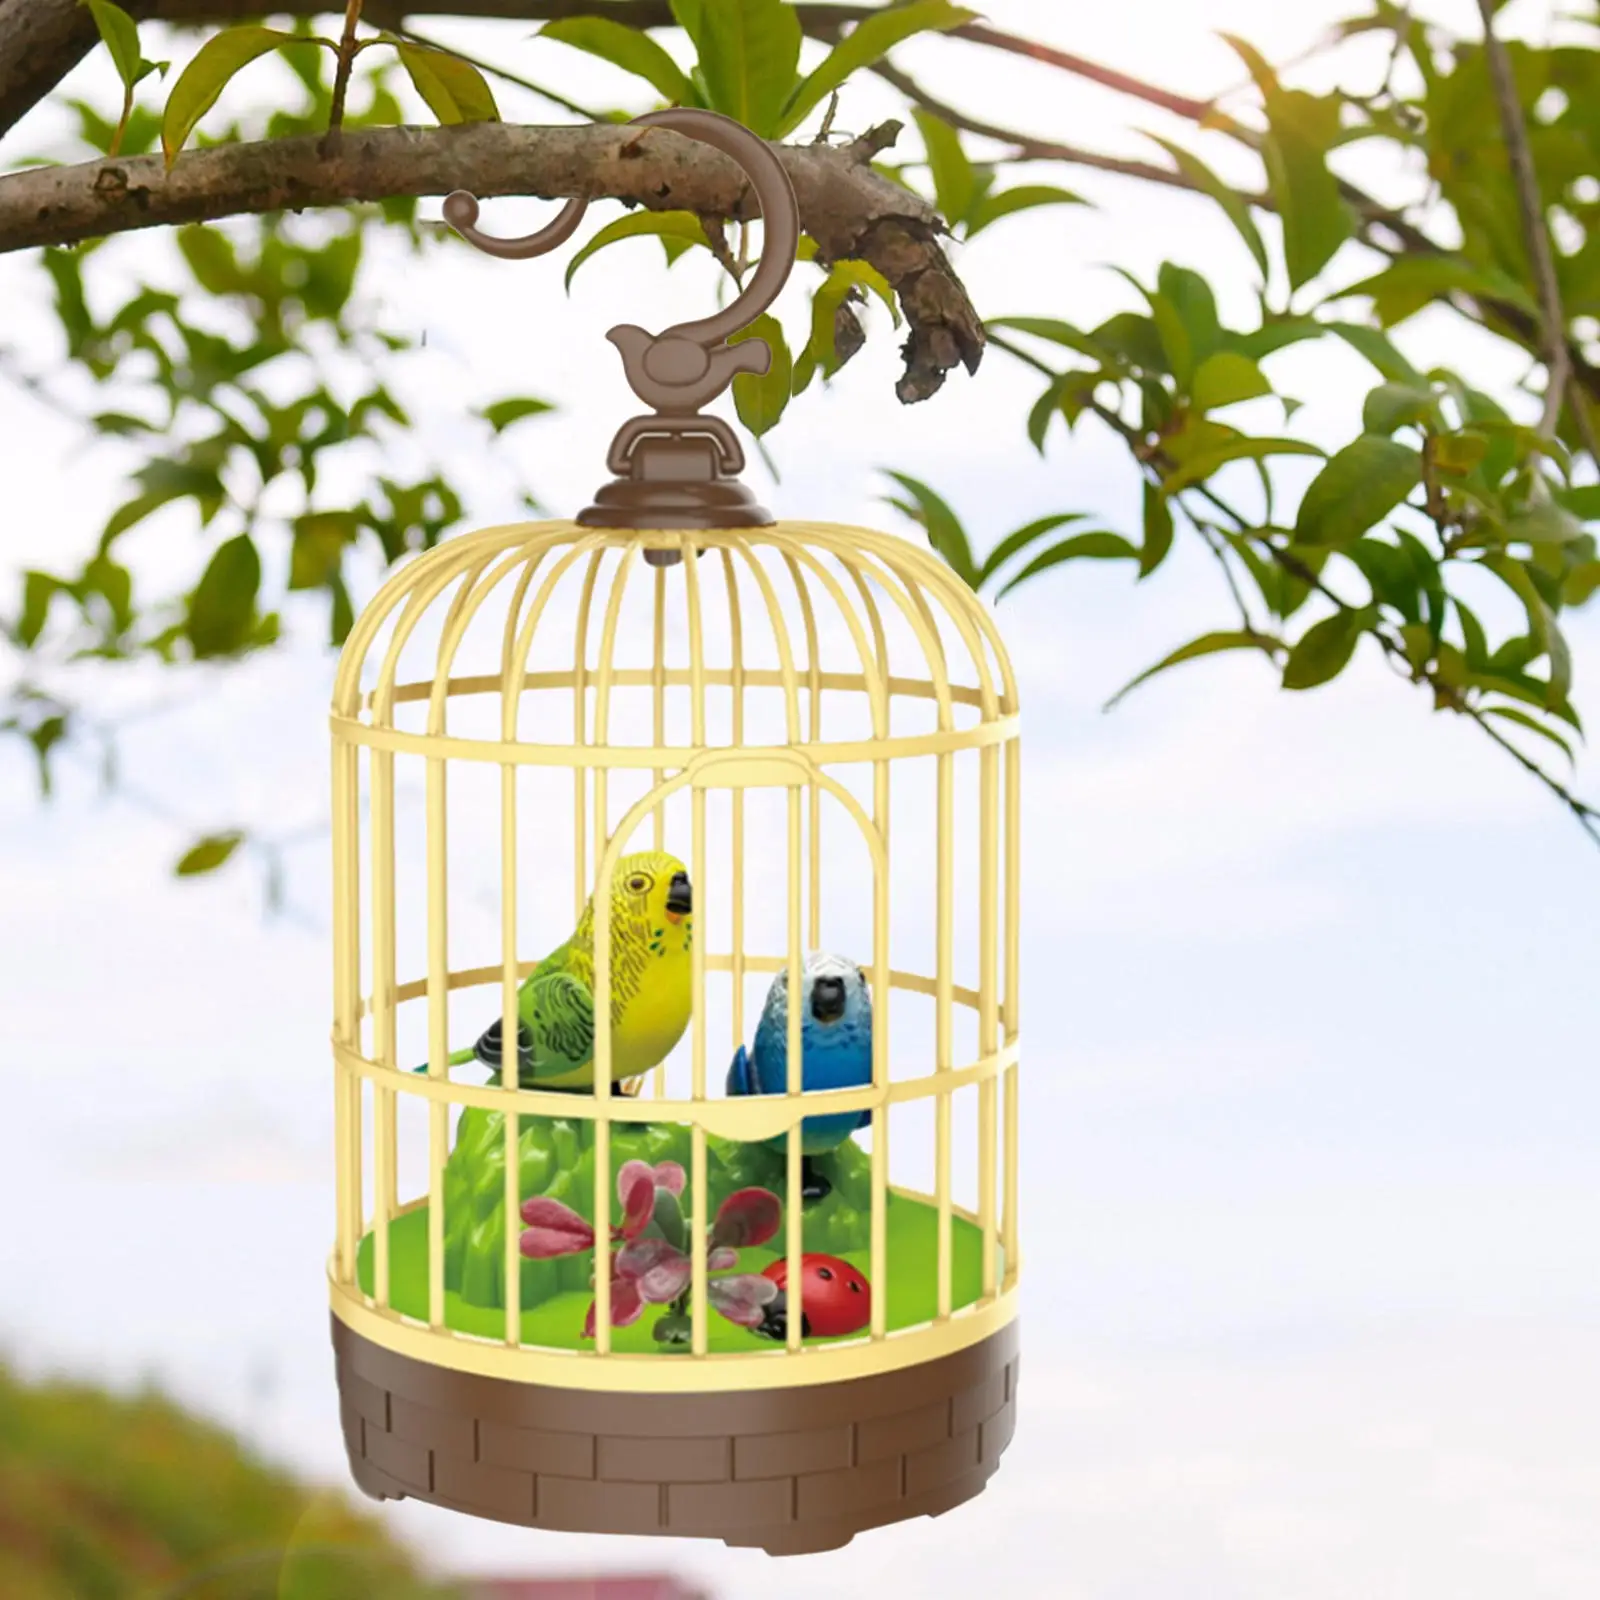 Recreation Mini Funny Singing Chirping Sound Activated Pet Home Decor Gift Bird In Cage Toy Battery Operated Children Kids